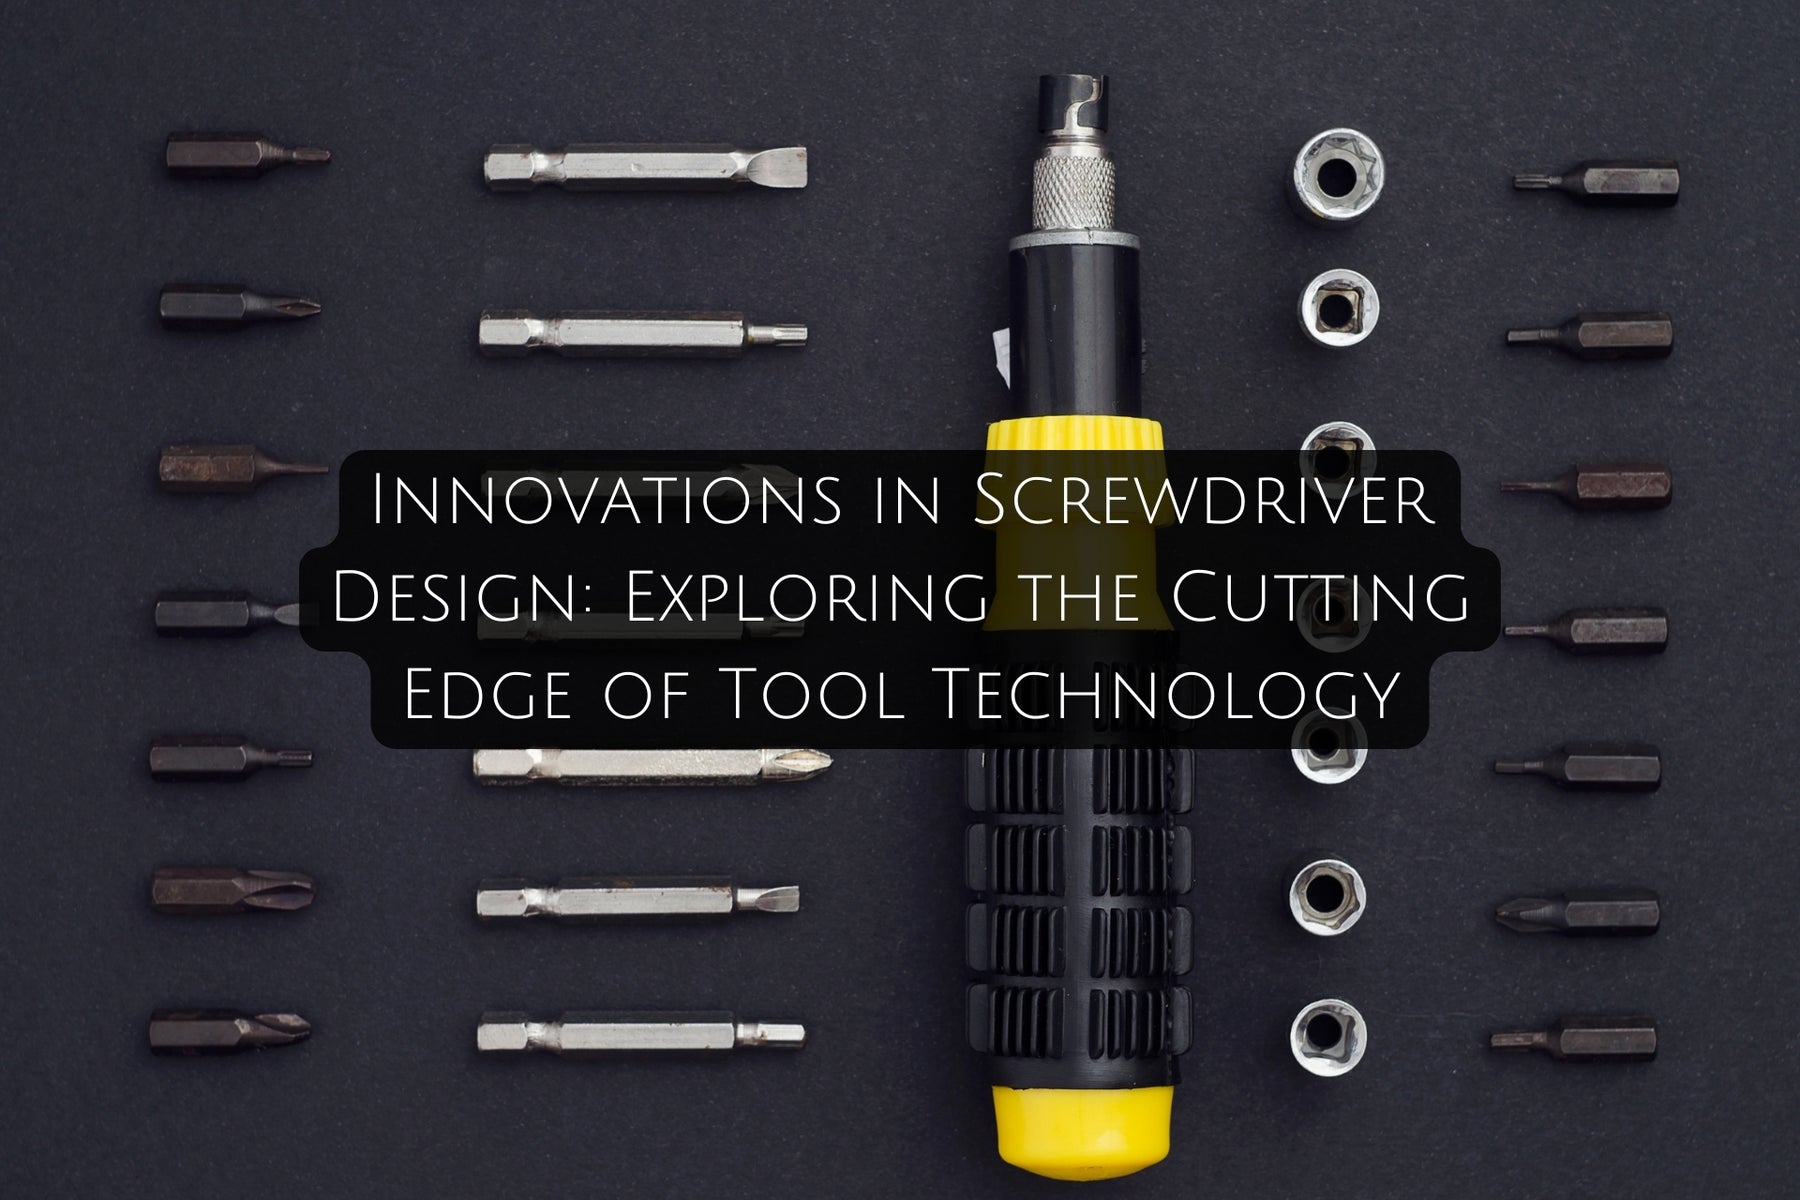 Innovations in Screwdriver Design: Exploring the Cutting Edge of Tool Technology